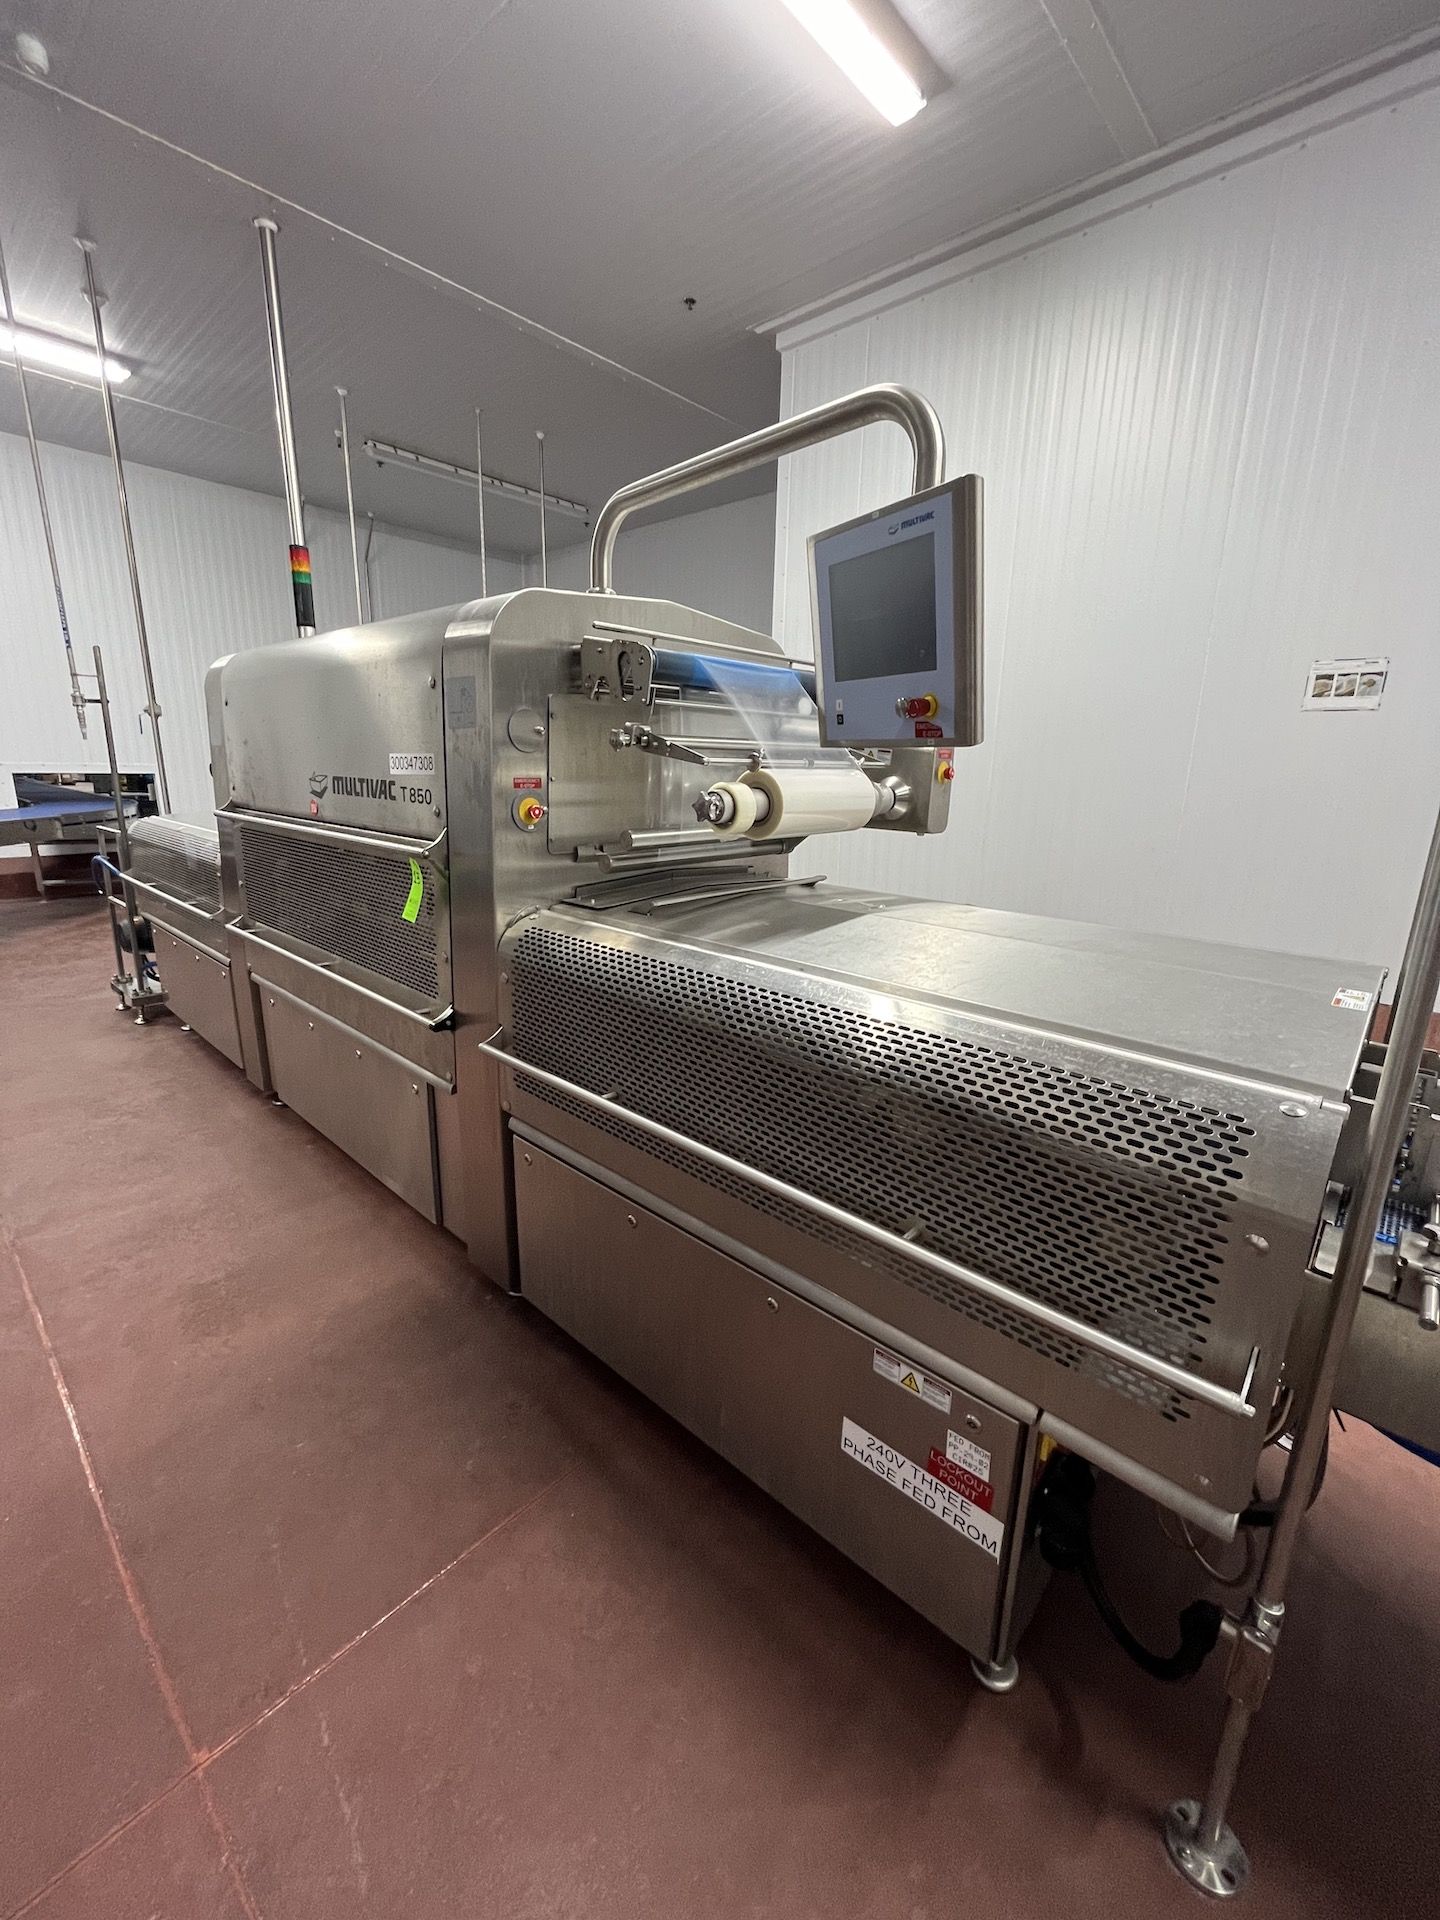 2016 MULTIVAC T-850 TRAY SEALER, S/N 239882, WITH BUSCH VACUUM PUMP, MODEL PANDA WV 1000 C 006,  AND - Image 2 of 36